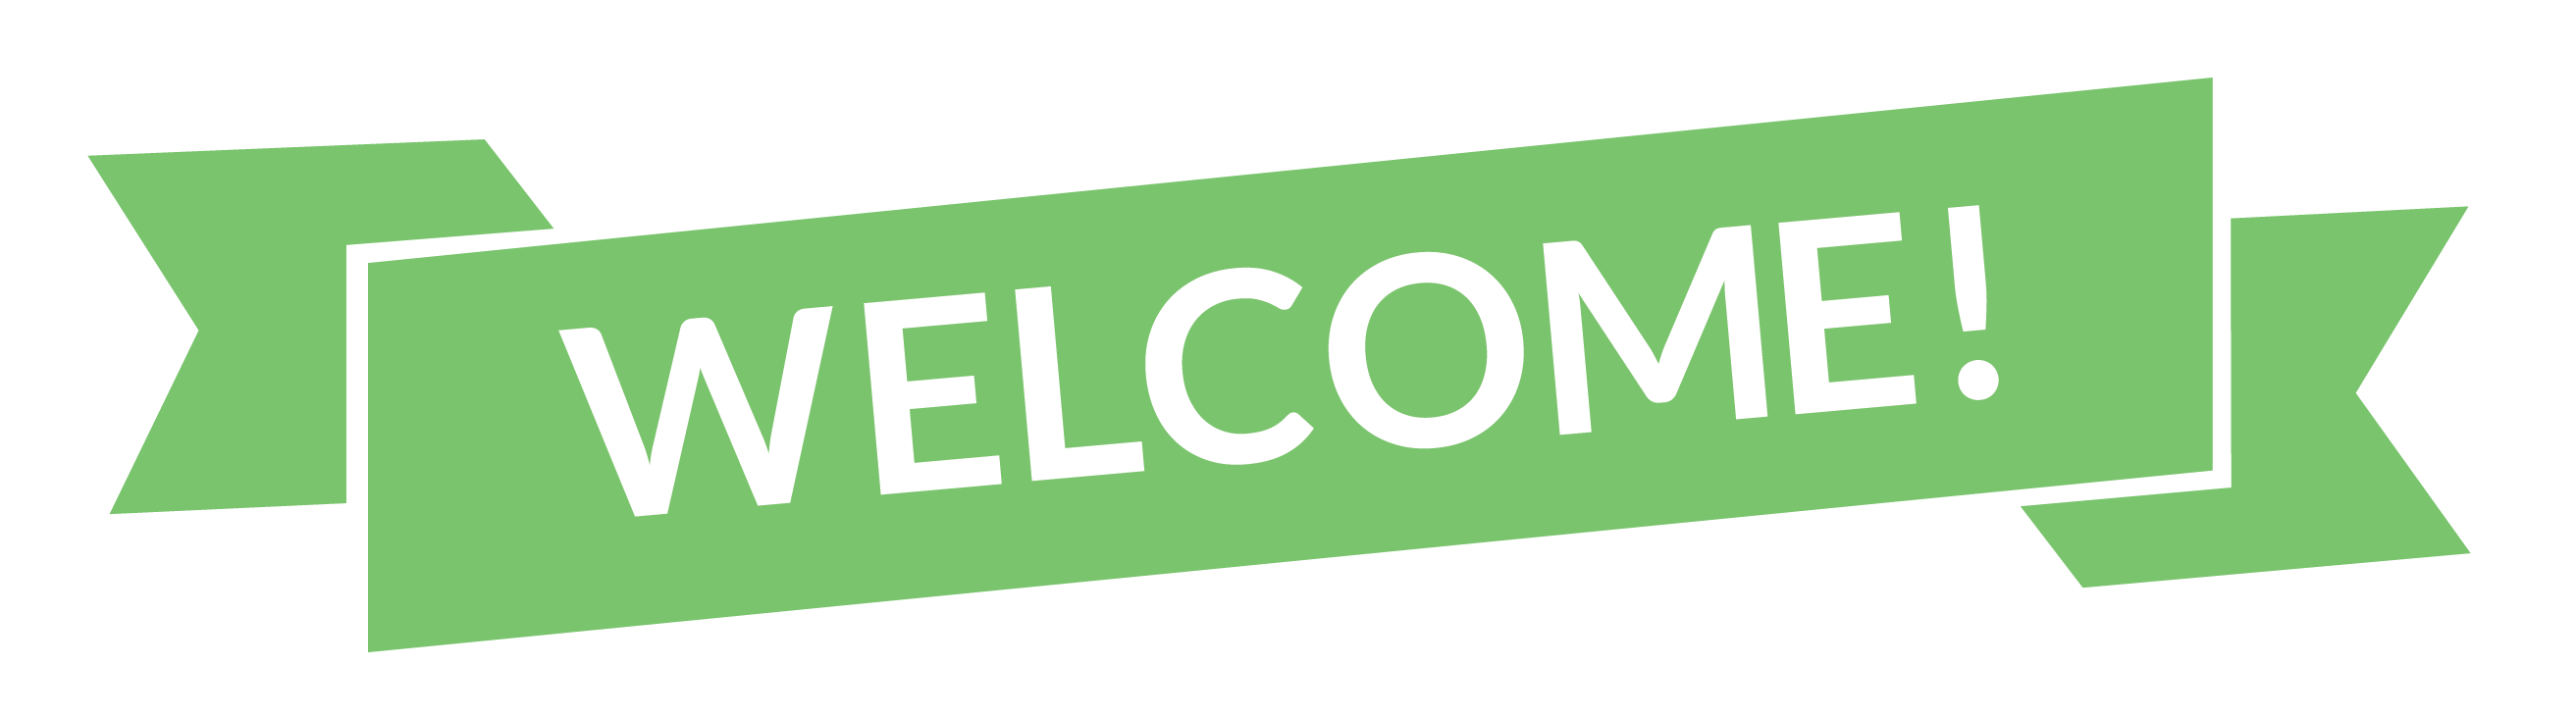 welcome-images-25.png